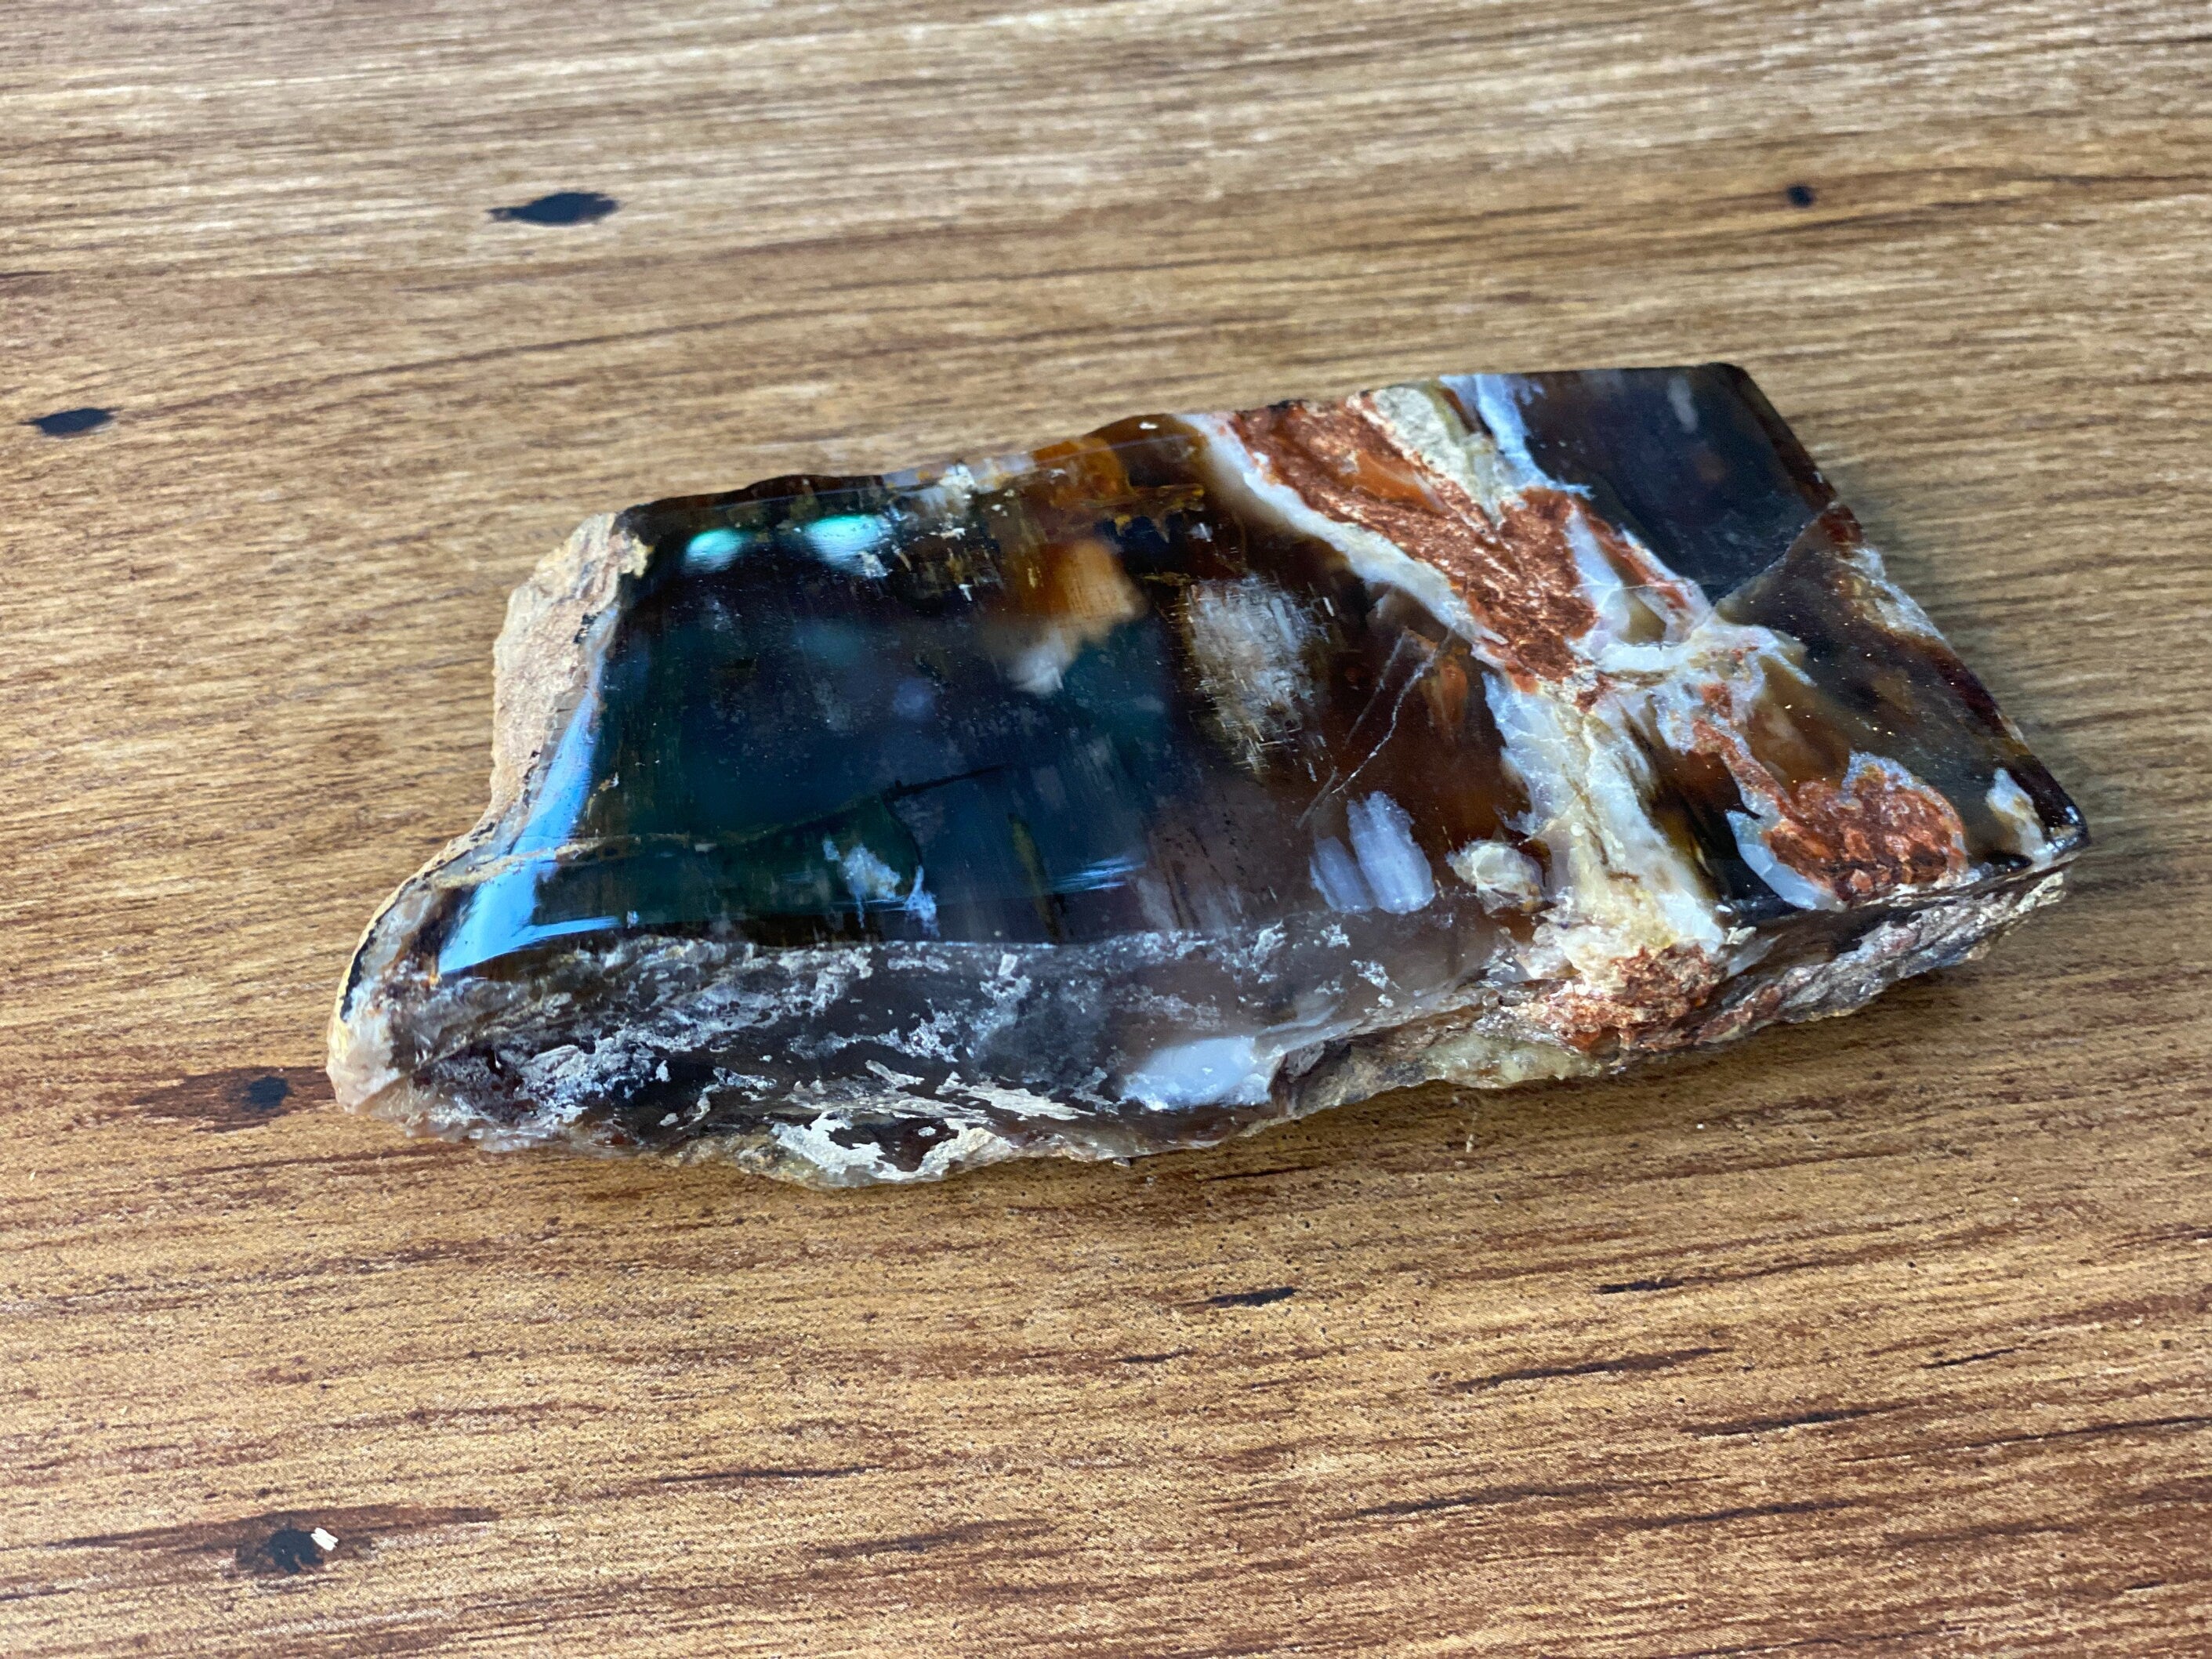 Petrified Wood, Polished and Glossed, Polished Petrified Wood Slab From Nevada, About 4.5 x 2.5 x 1.5 Inches in Size